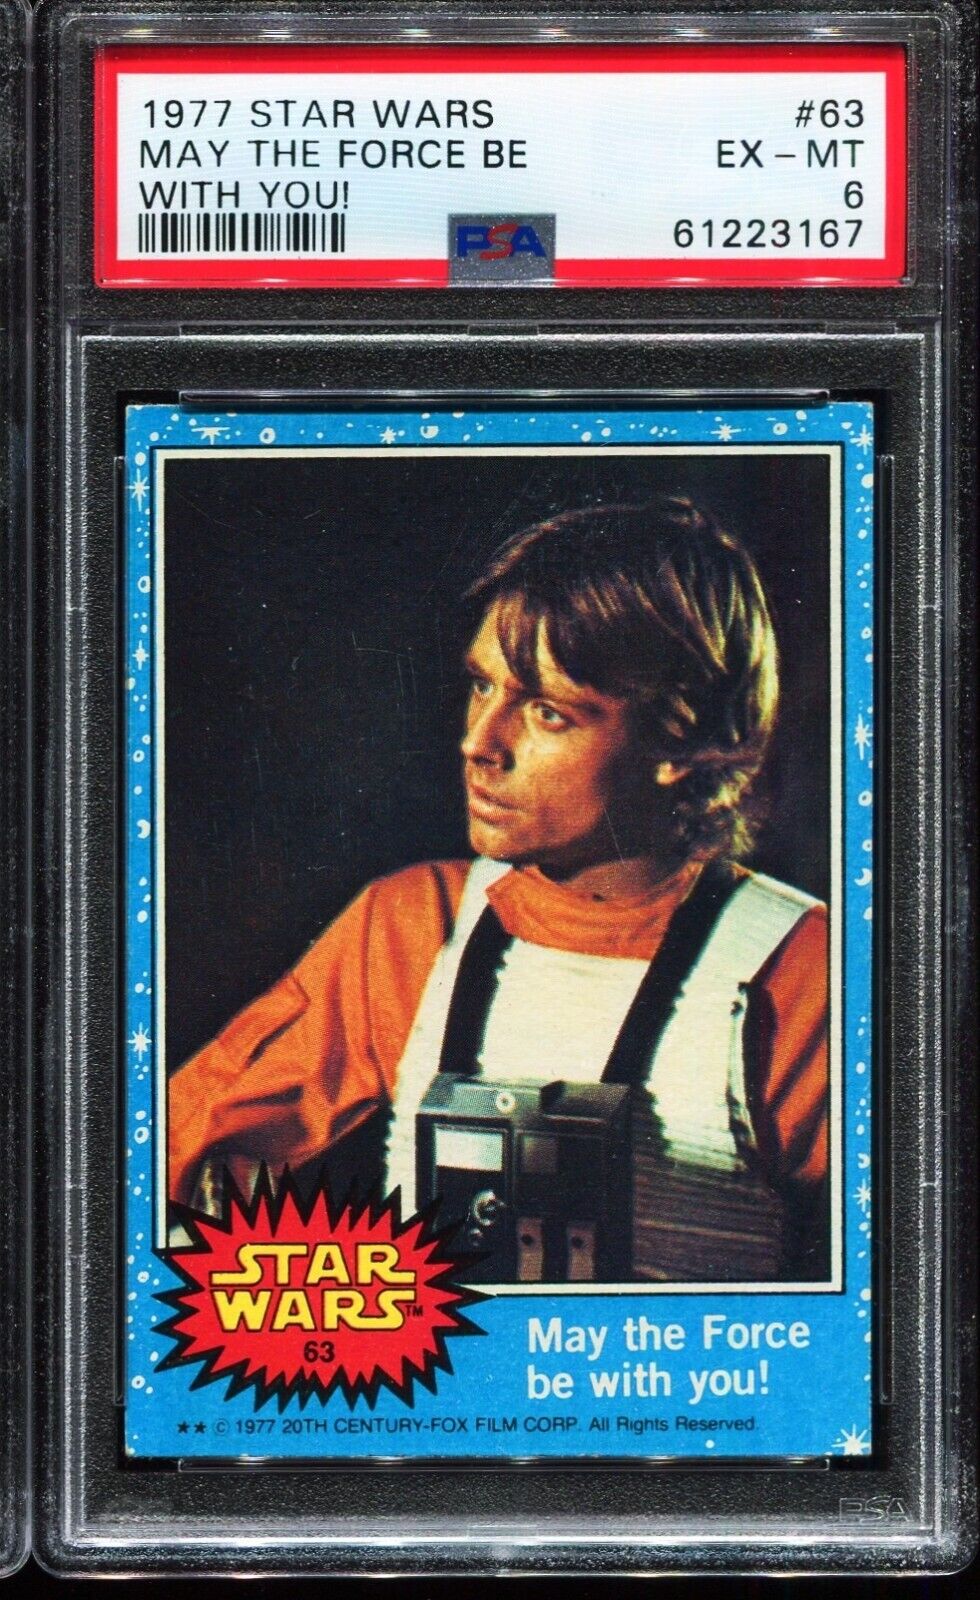 1977 PSA Star Wars #63 MAY THE FORCE BE WITH YOU PSA 6 EX-MT x